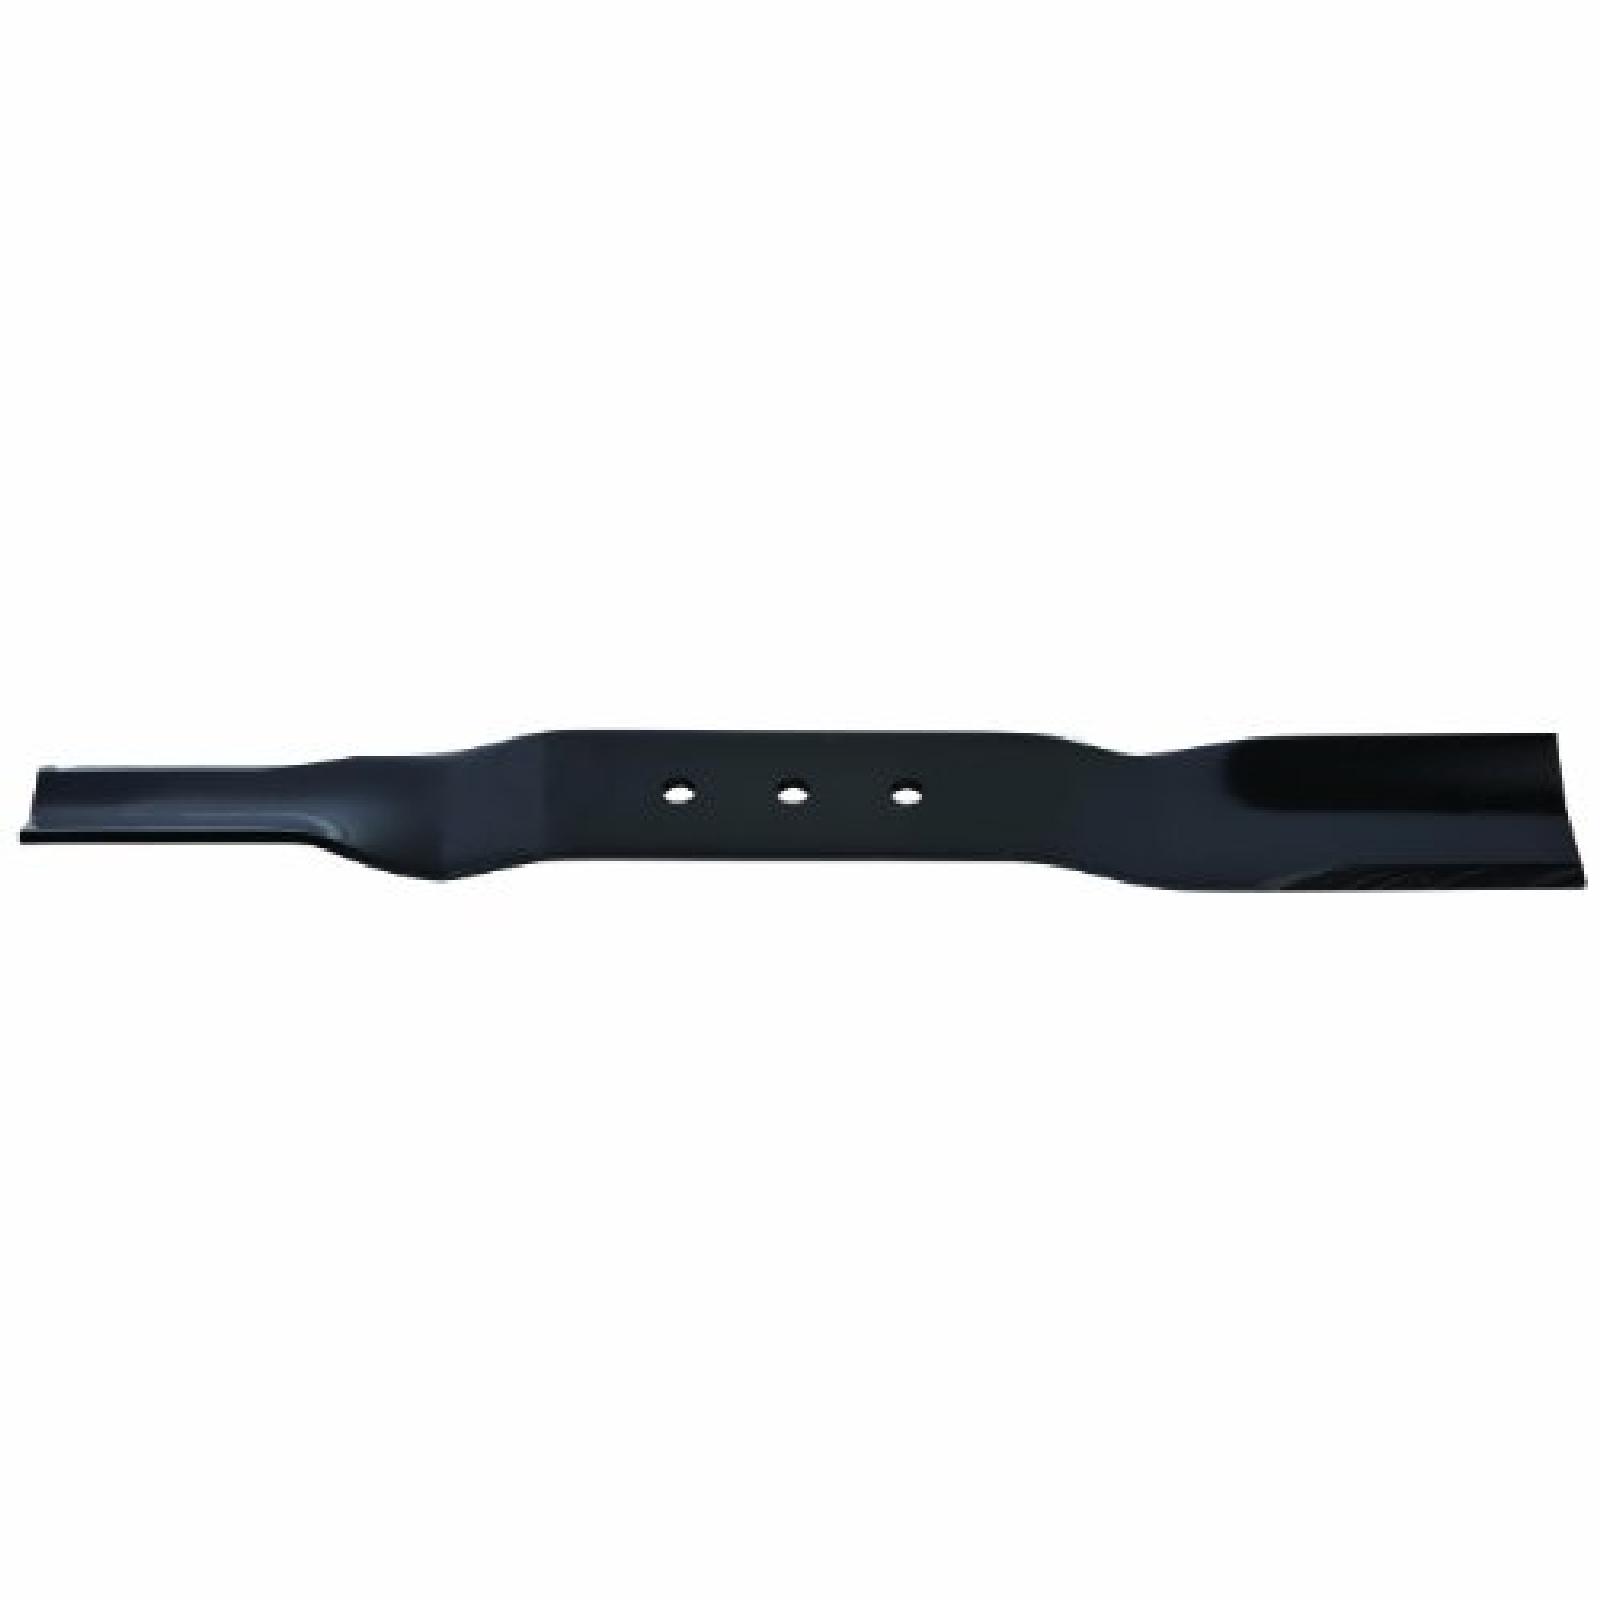 BLADE, SWISHER 9037, 20 1 part# 91-050 by Oregon - Click Image to Close